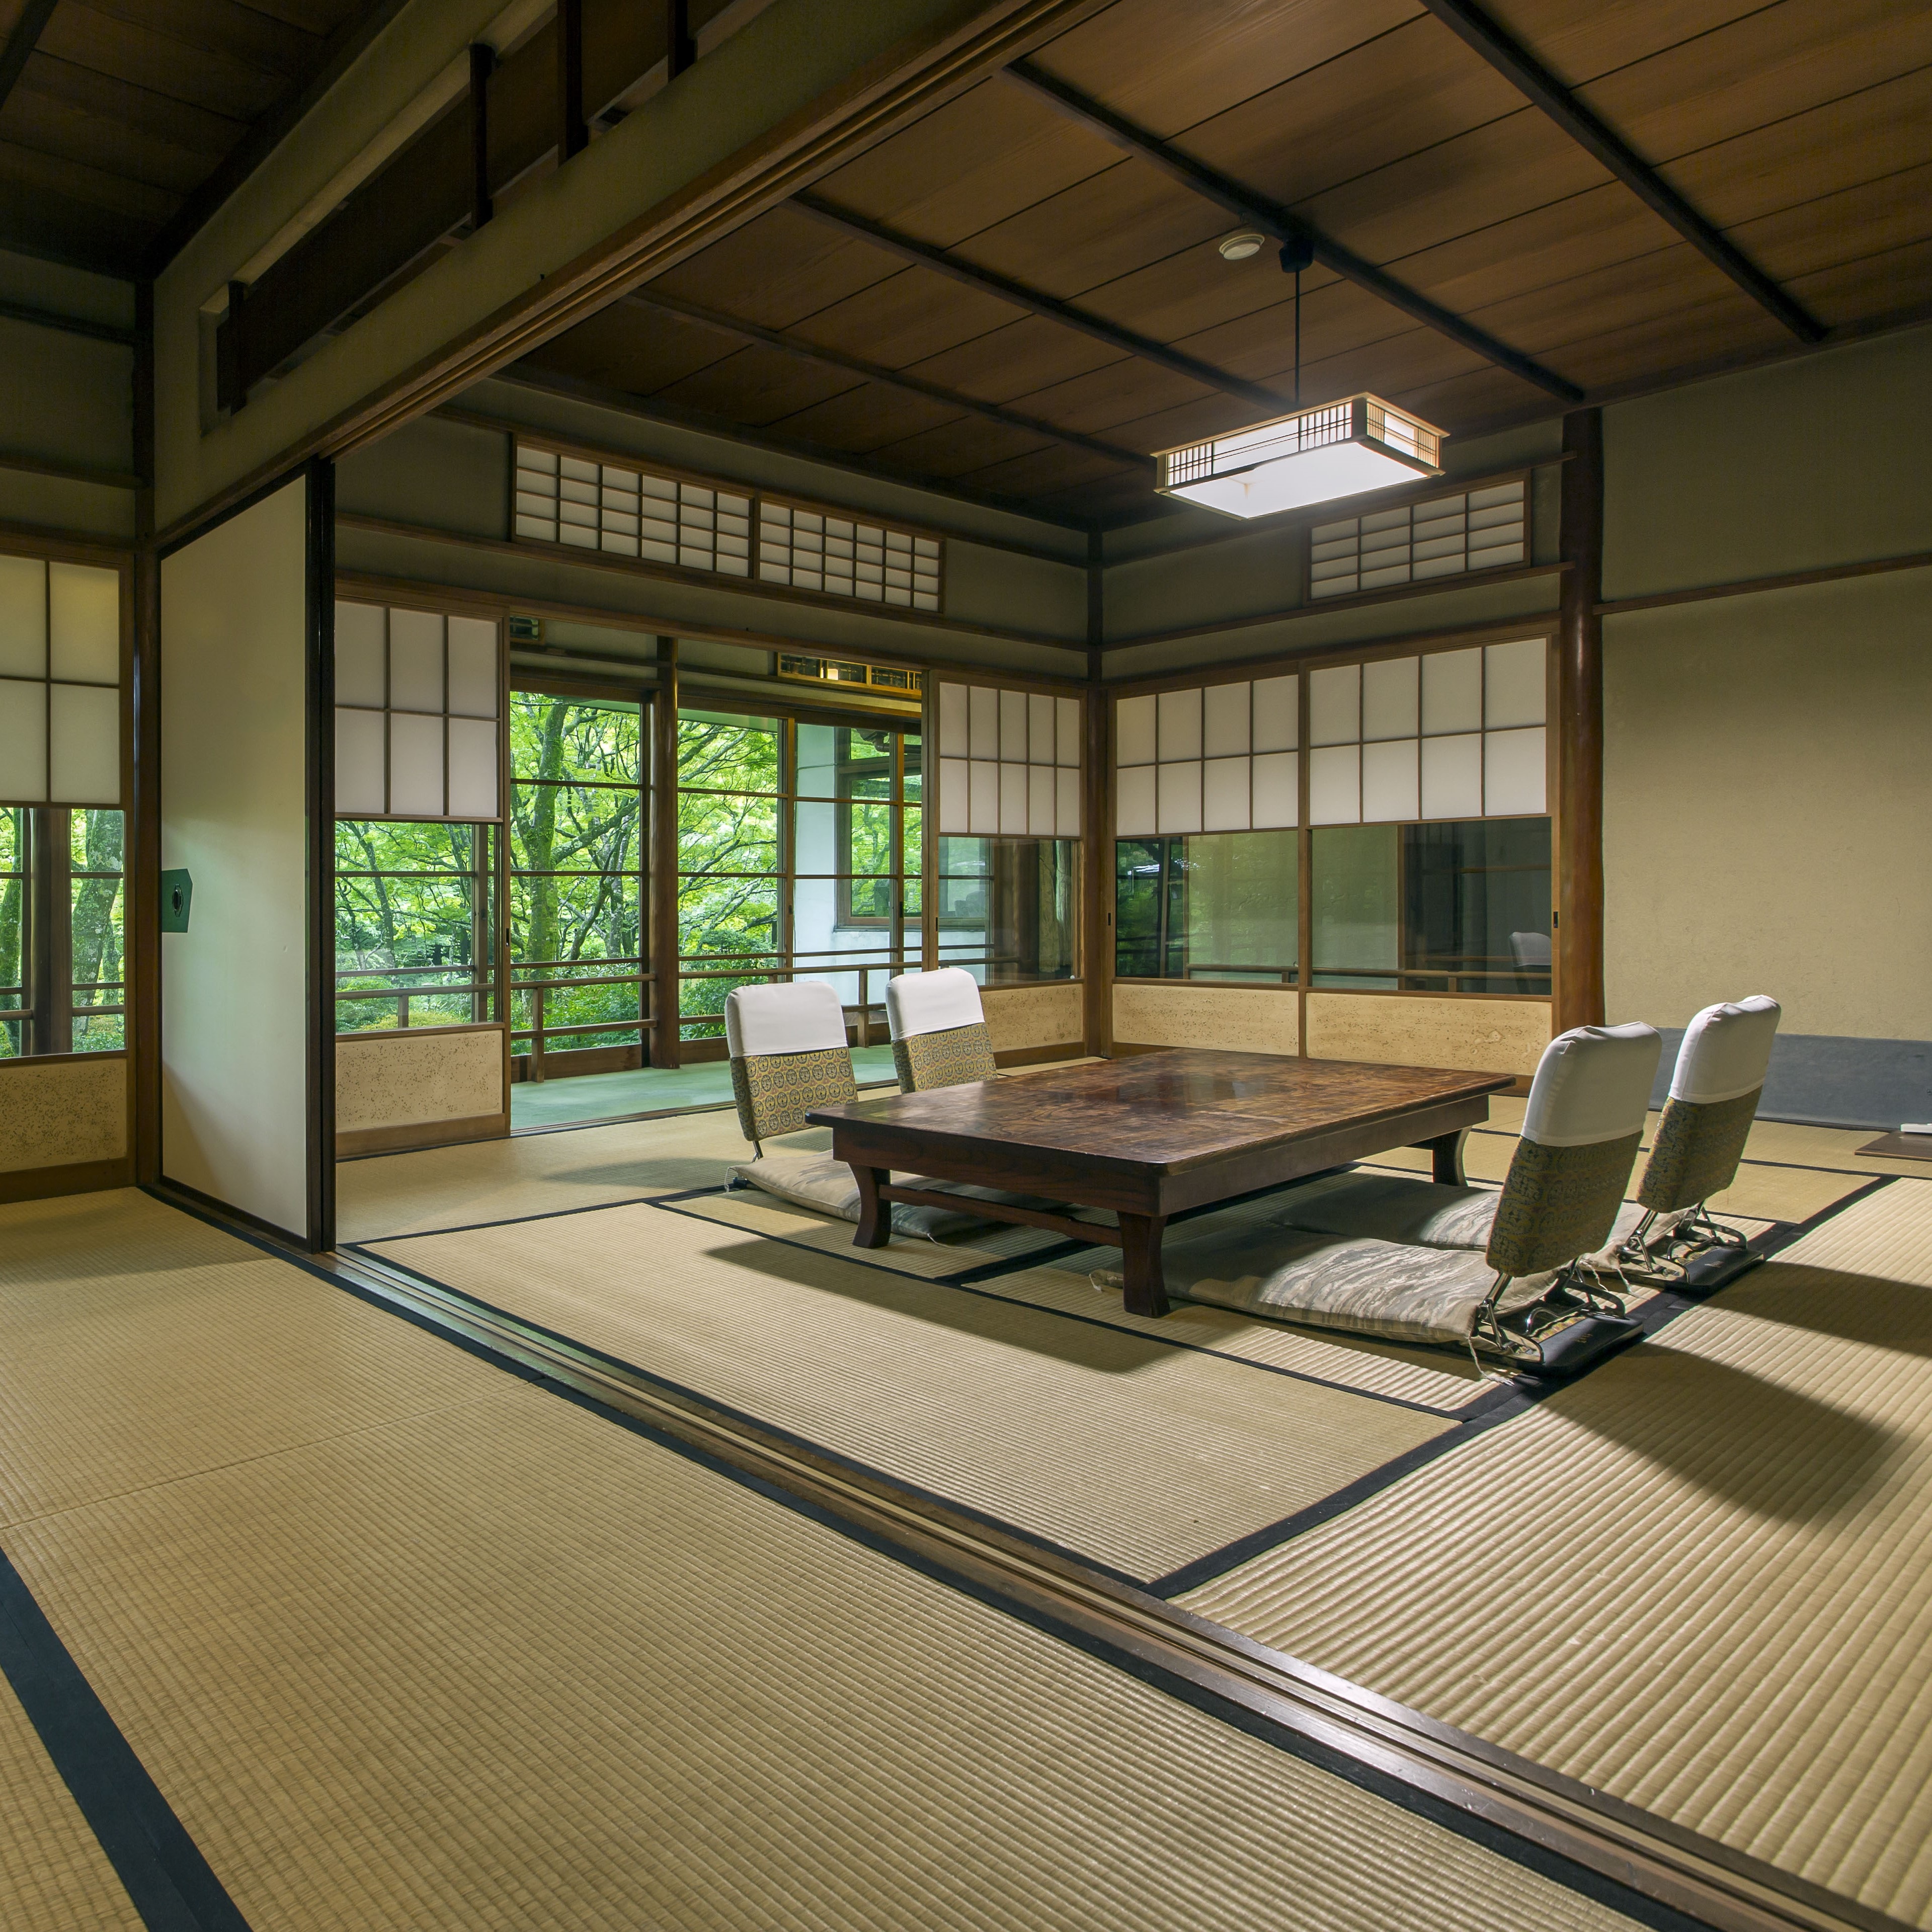 [Away guest room, Kinkatei Hachishuan] This is the largest distance. Honma is connected to Hachishuan across the corridor and the Western-style room.